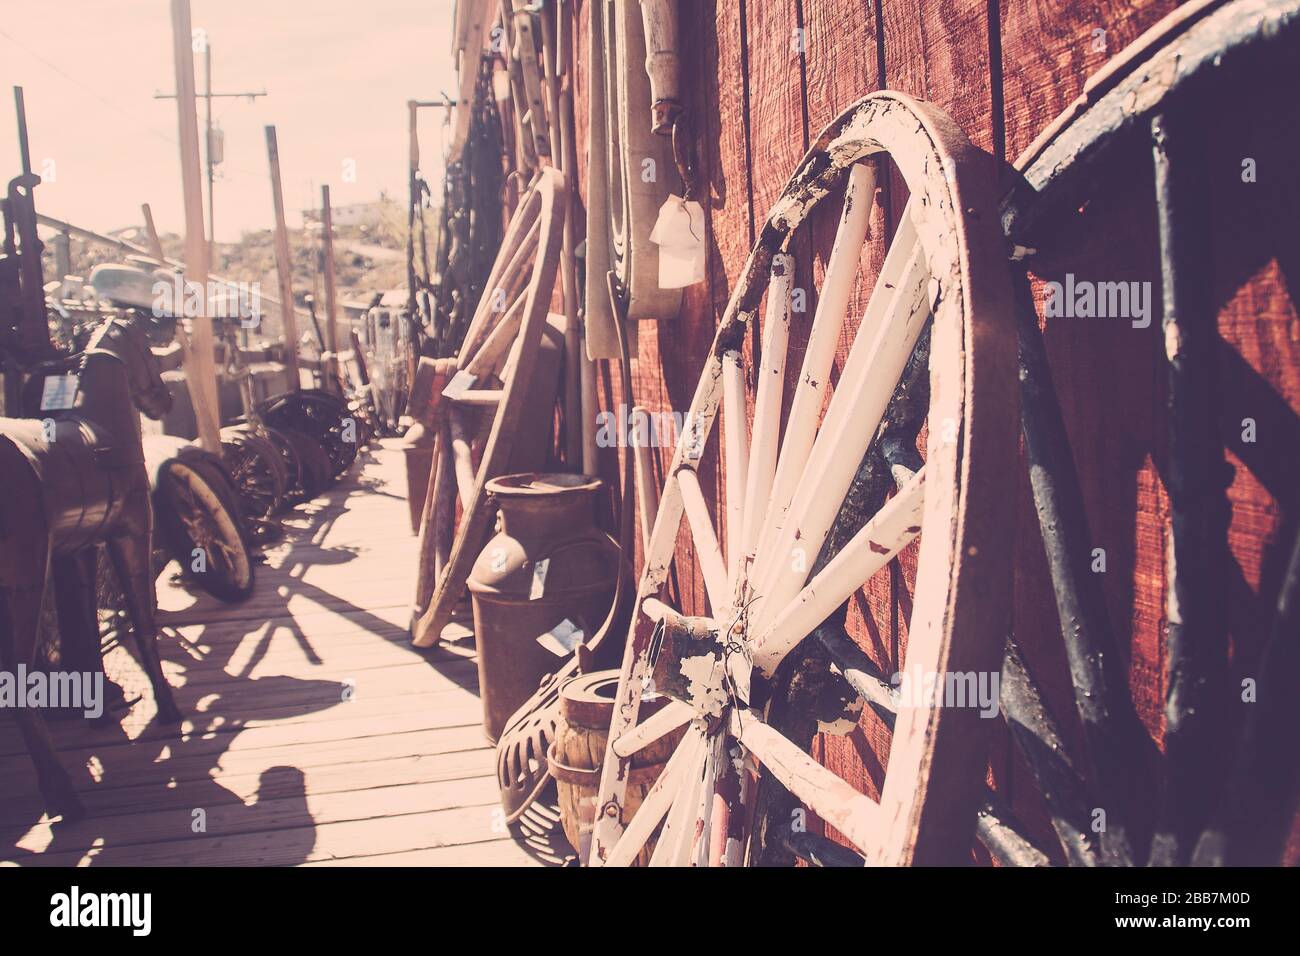 Wagon wheels, antiques, wooden building Stock Photo